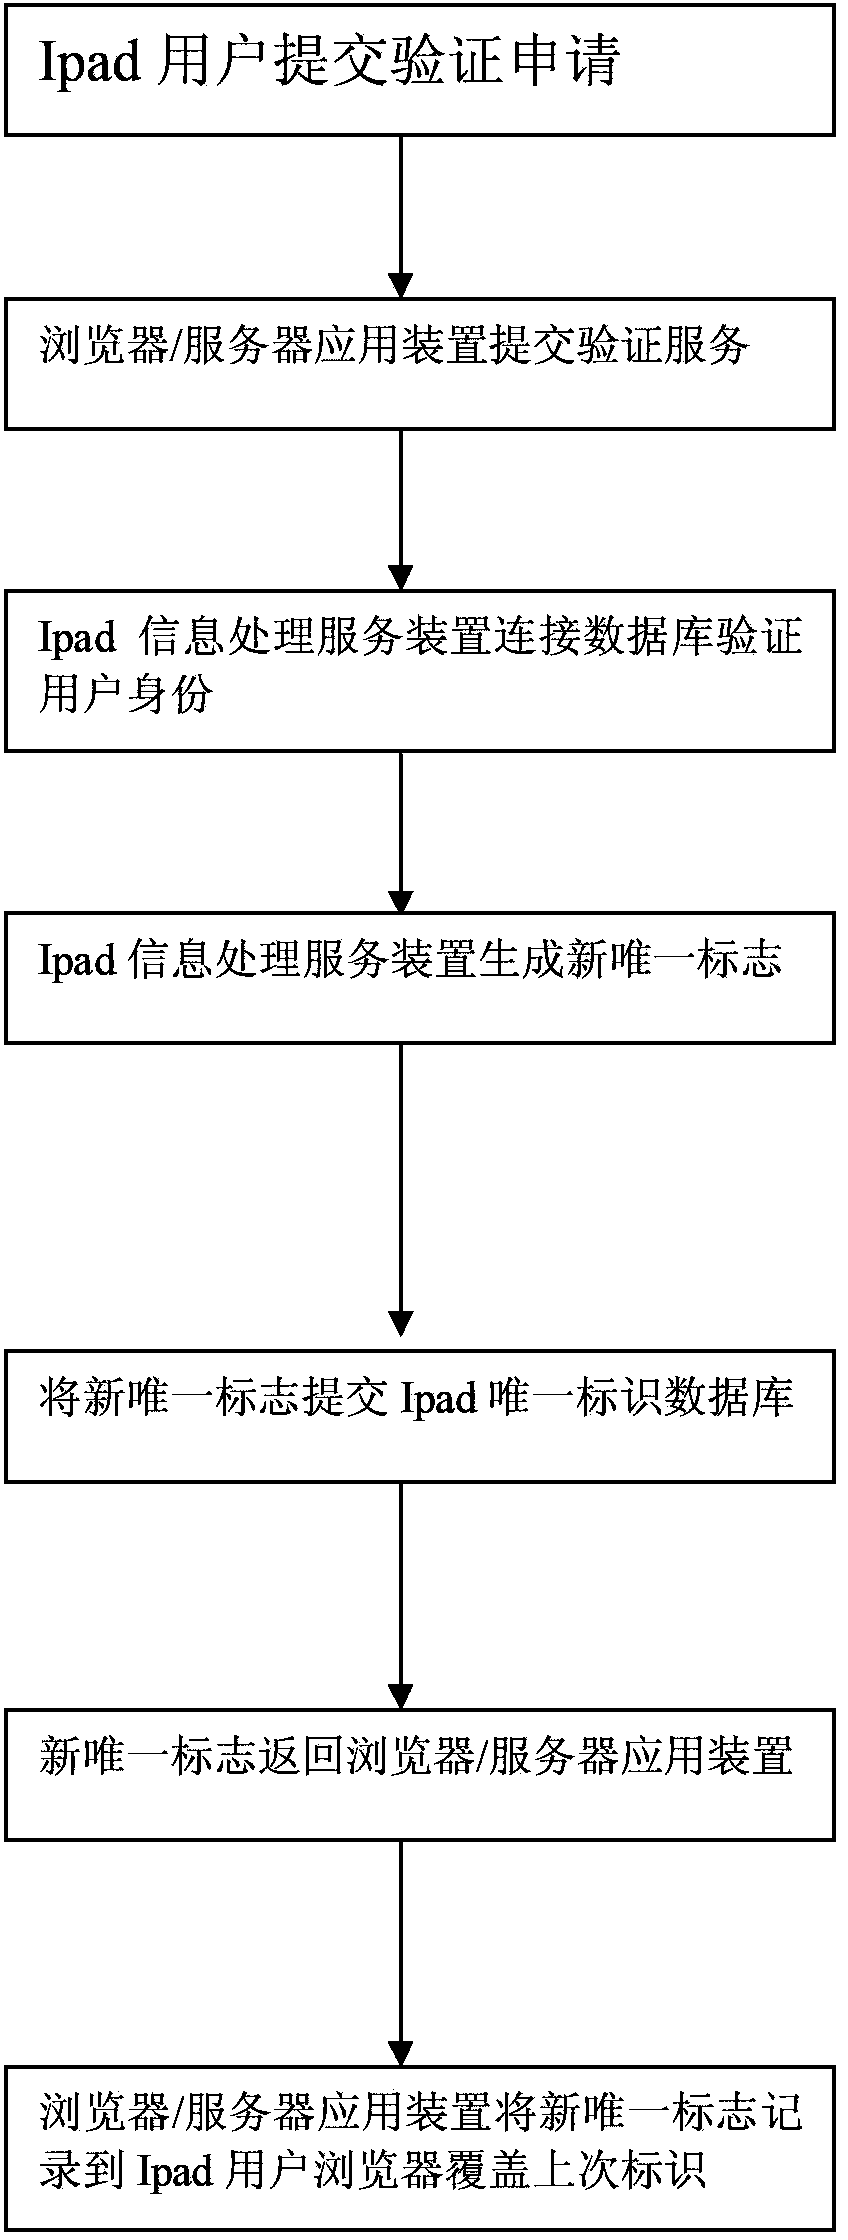 Method and device for achieving user hardware binding between browser/server (B/S) system and Ipad